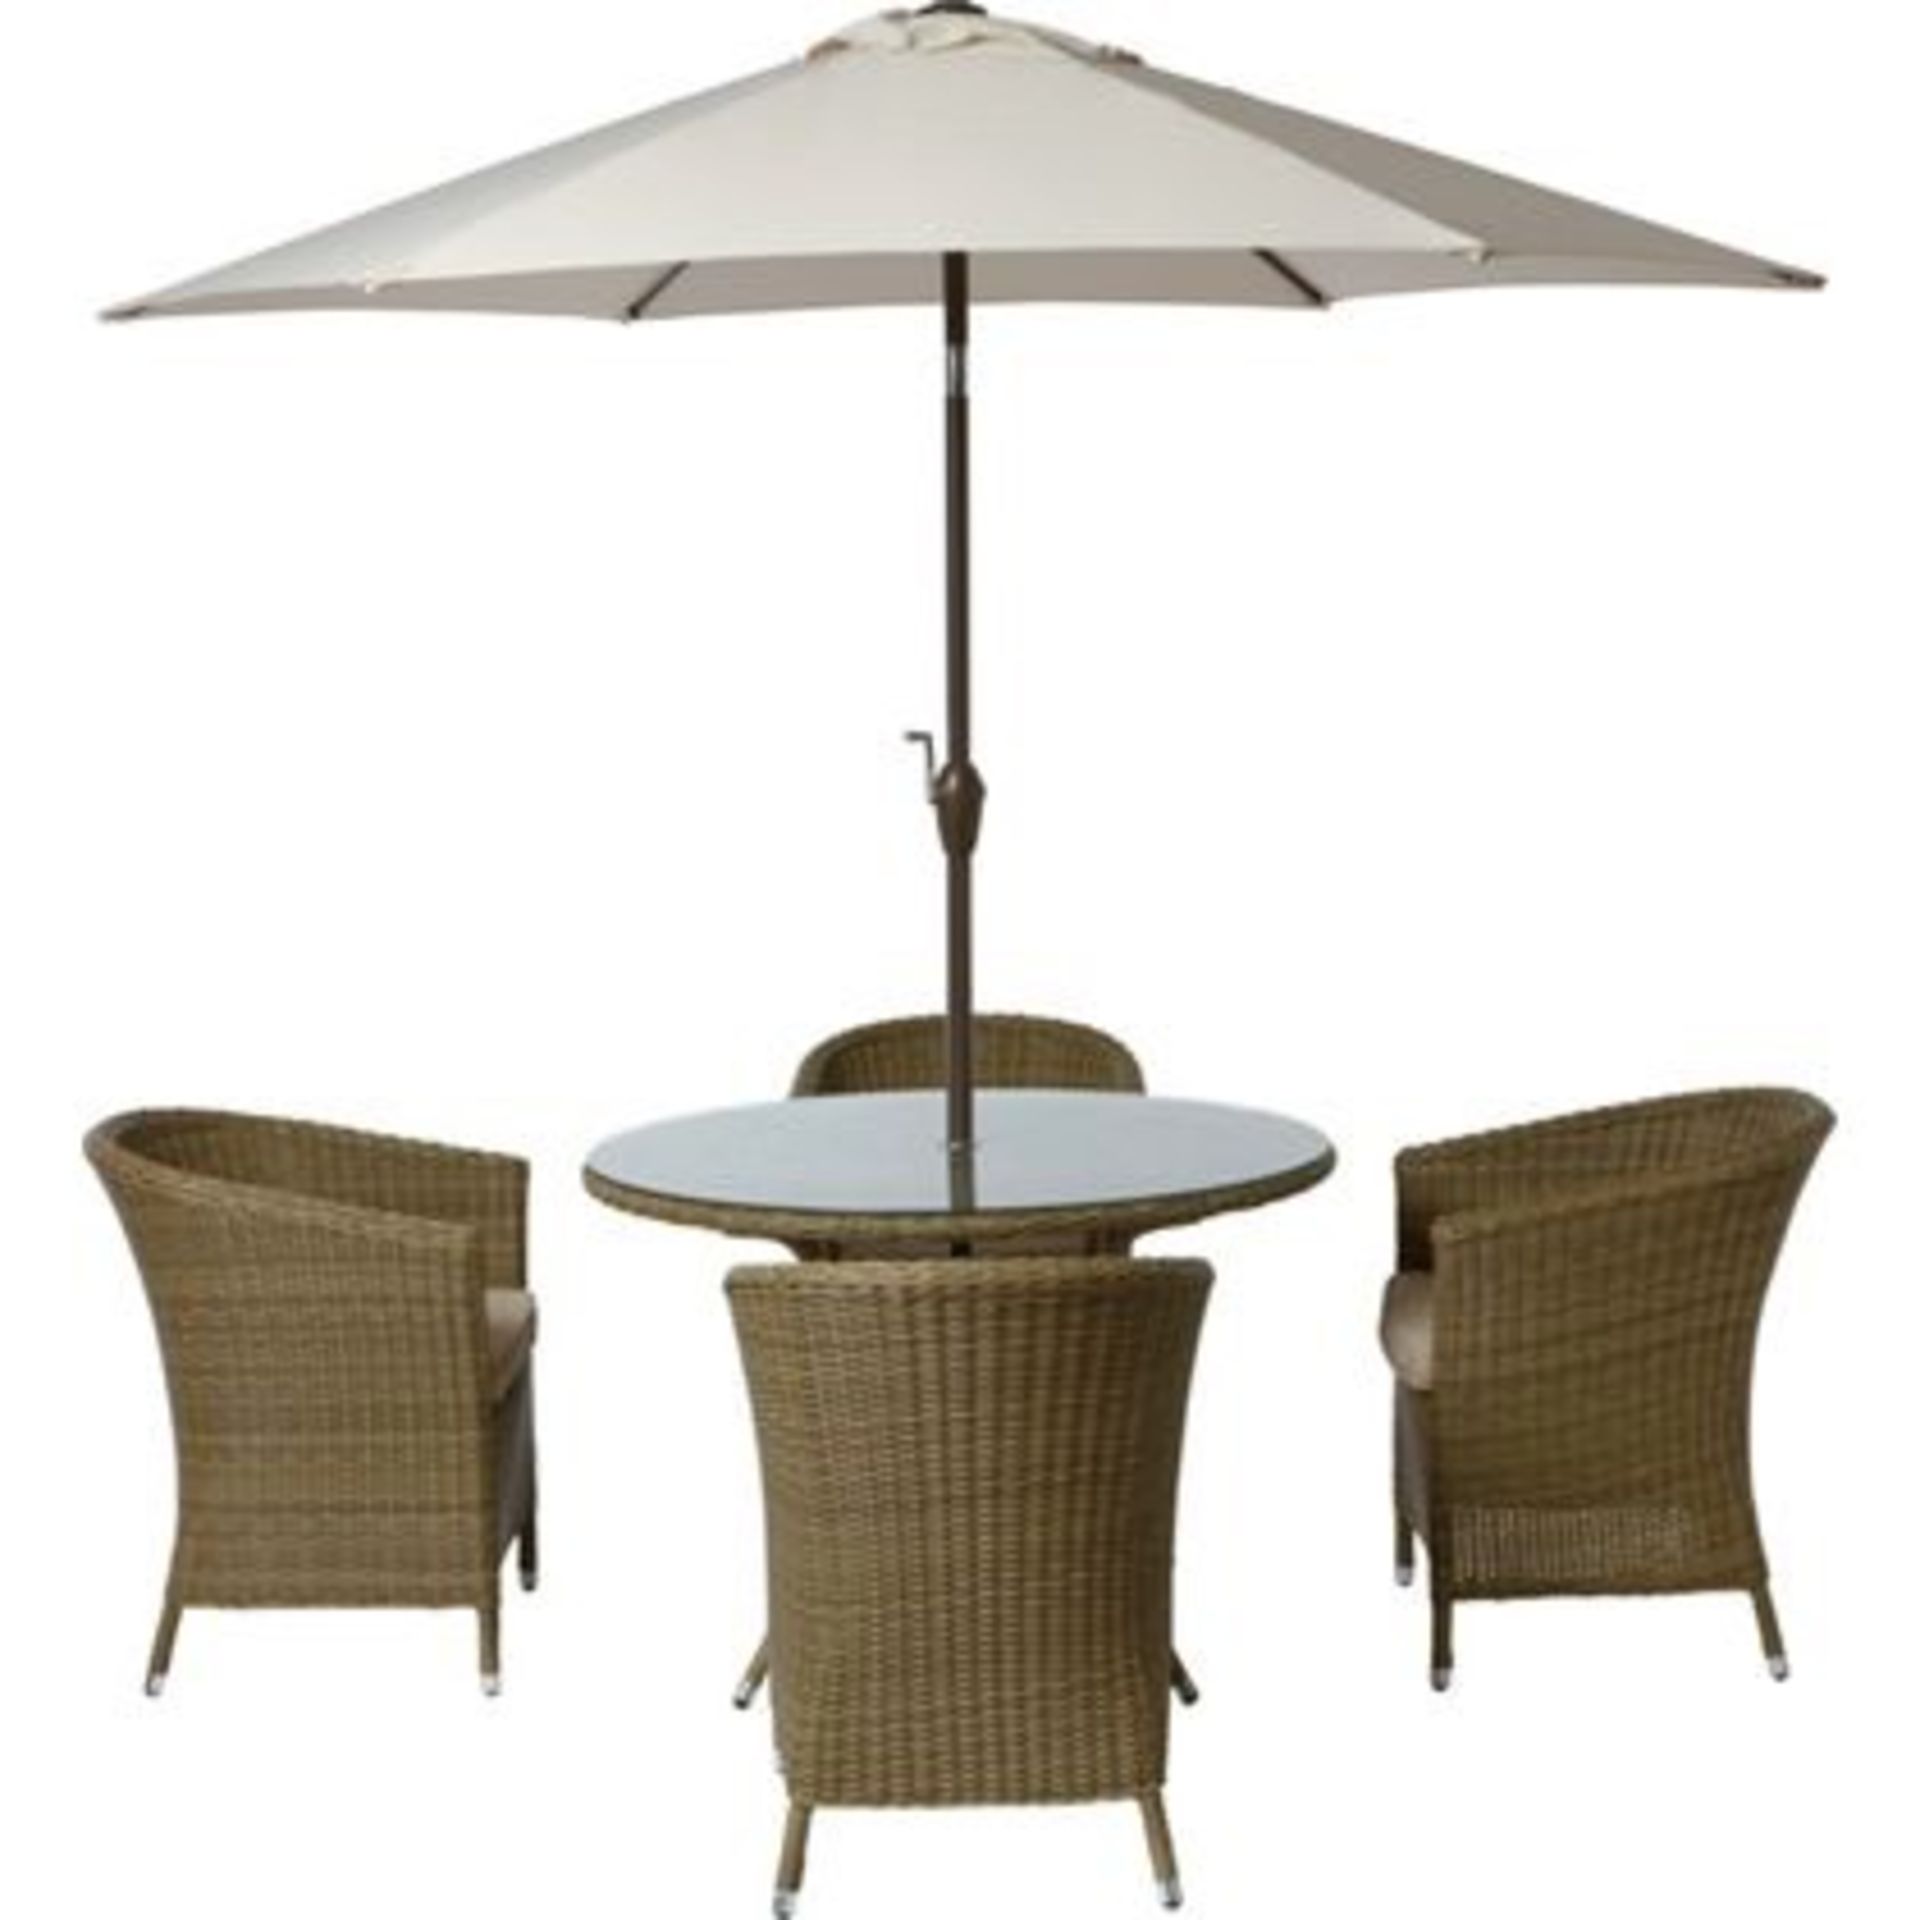 1 x New Worcester 4 Seater Rattan Effect Garden Furniture Set. RRP £599.99. ade from hand woven